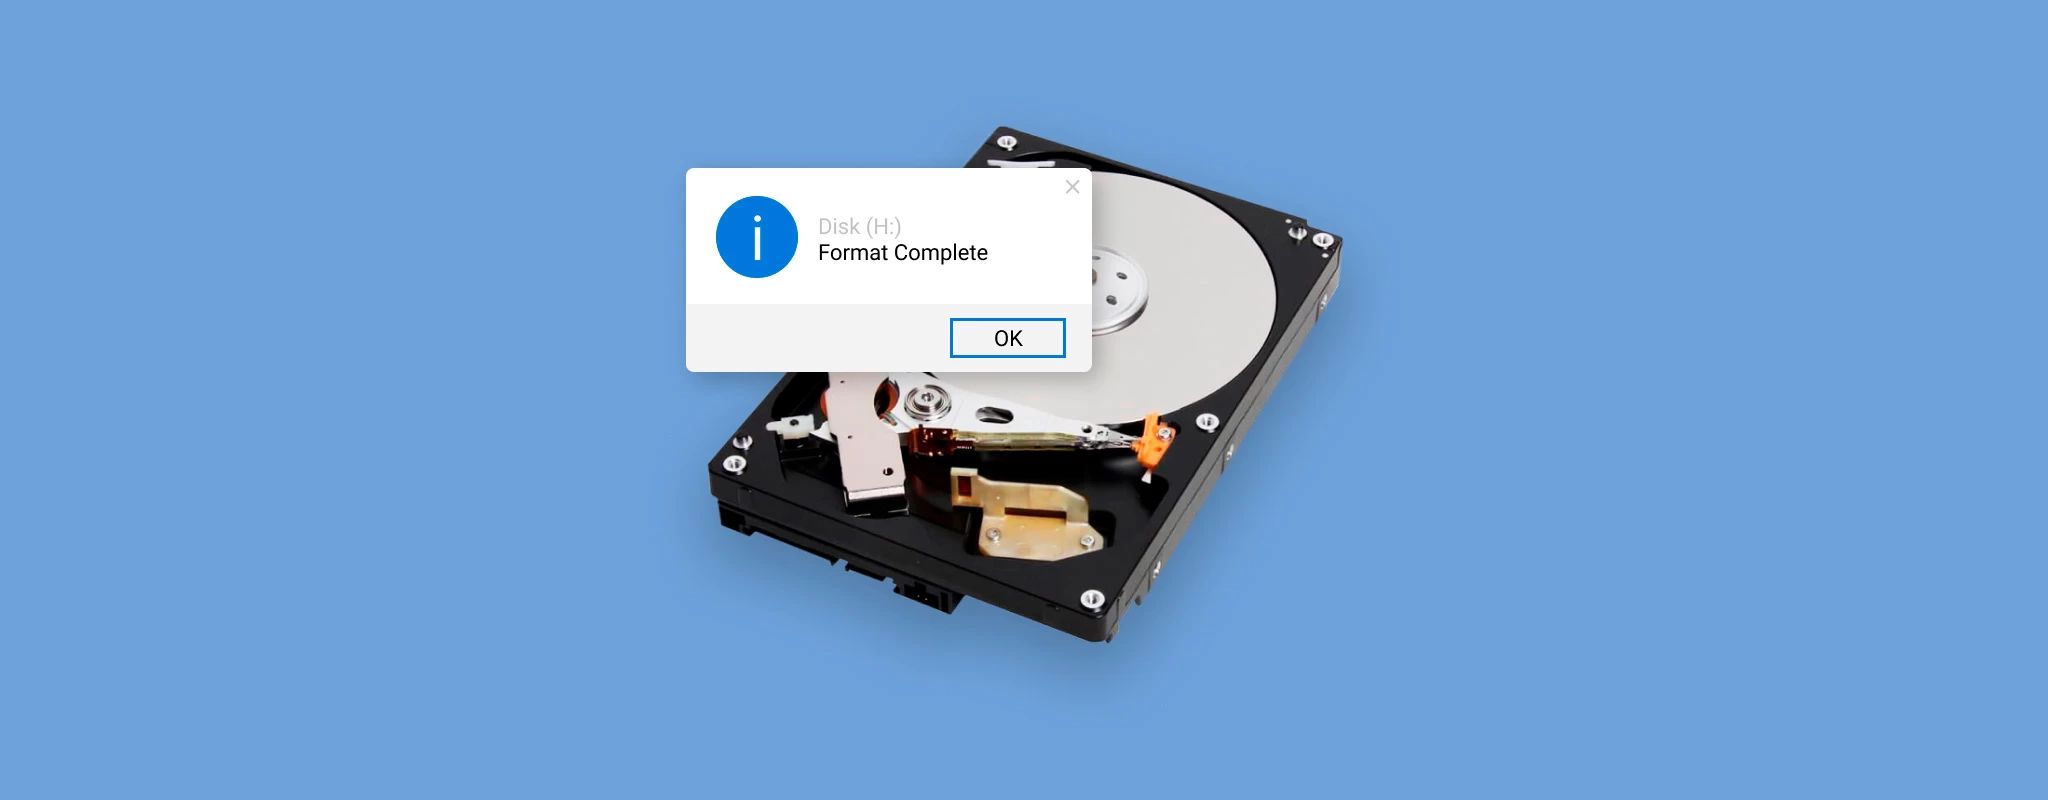 how-to-partition-and-format-a-hard-disk-drive